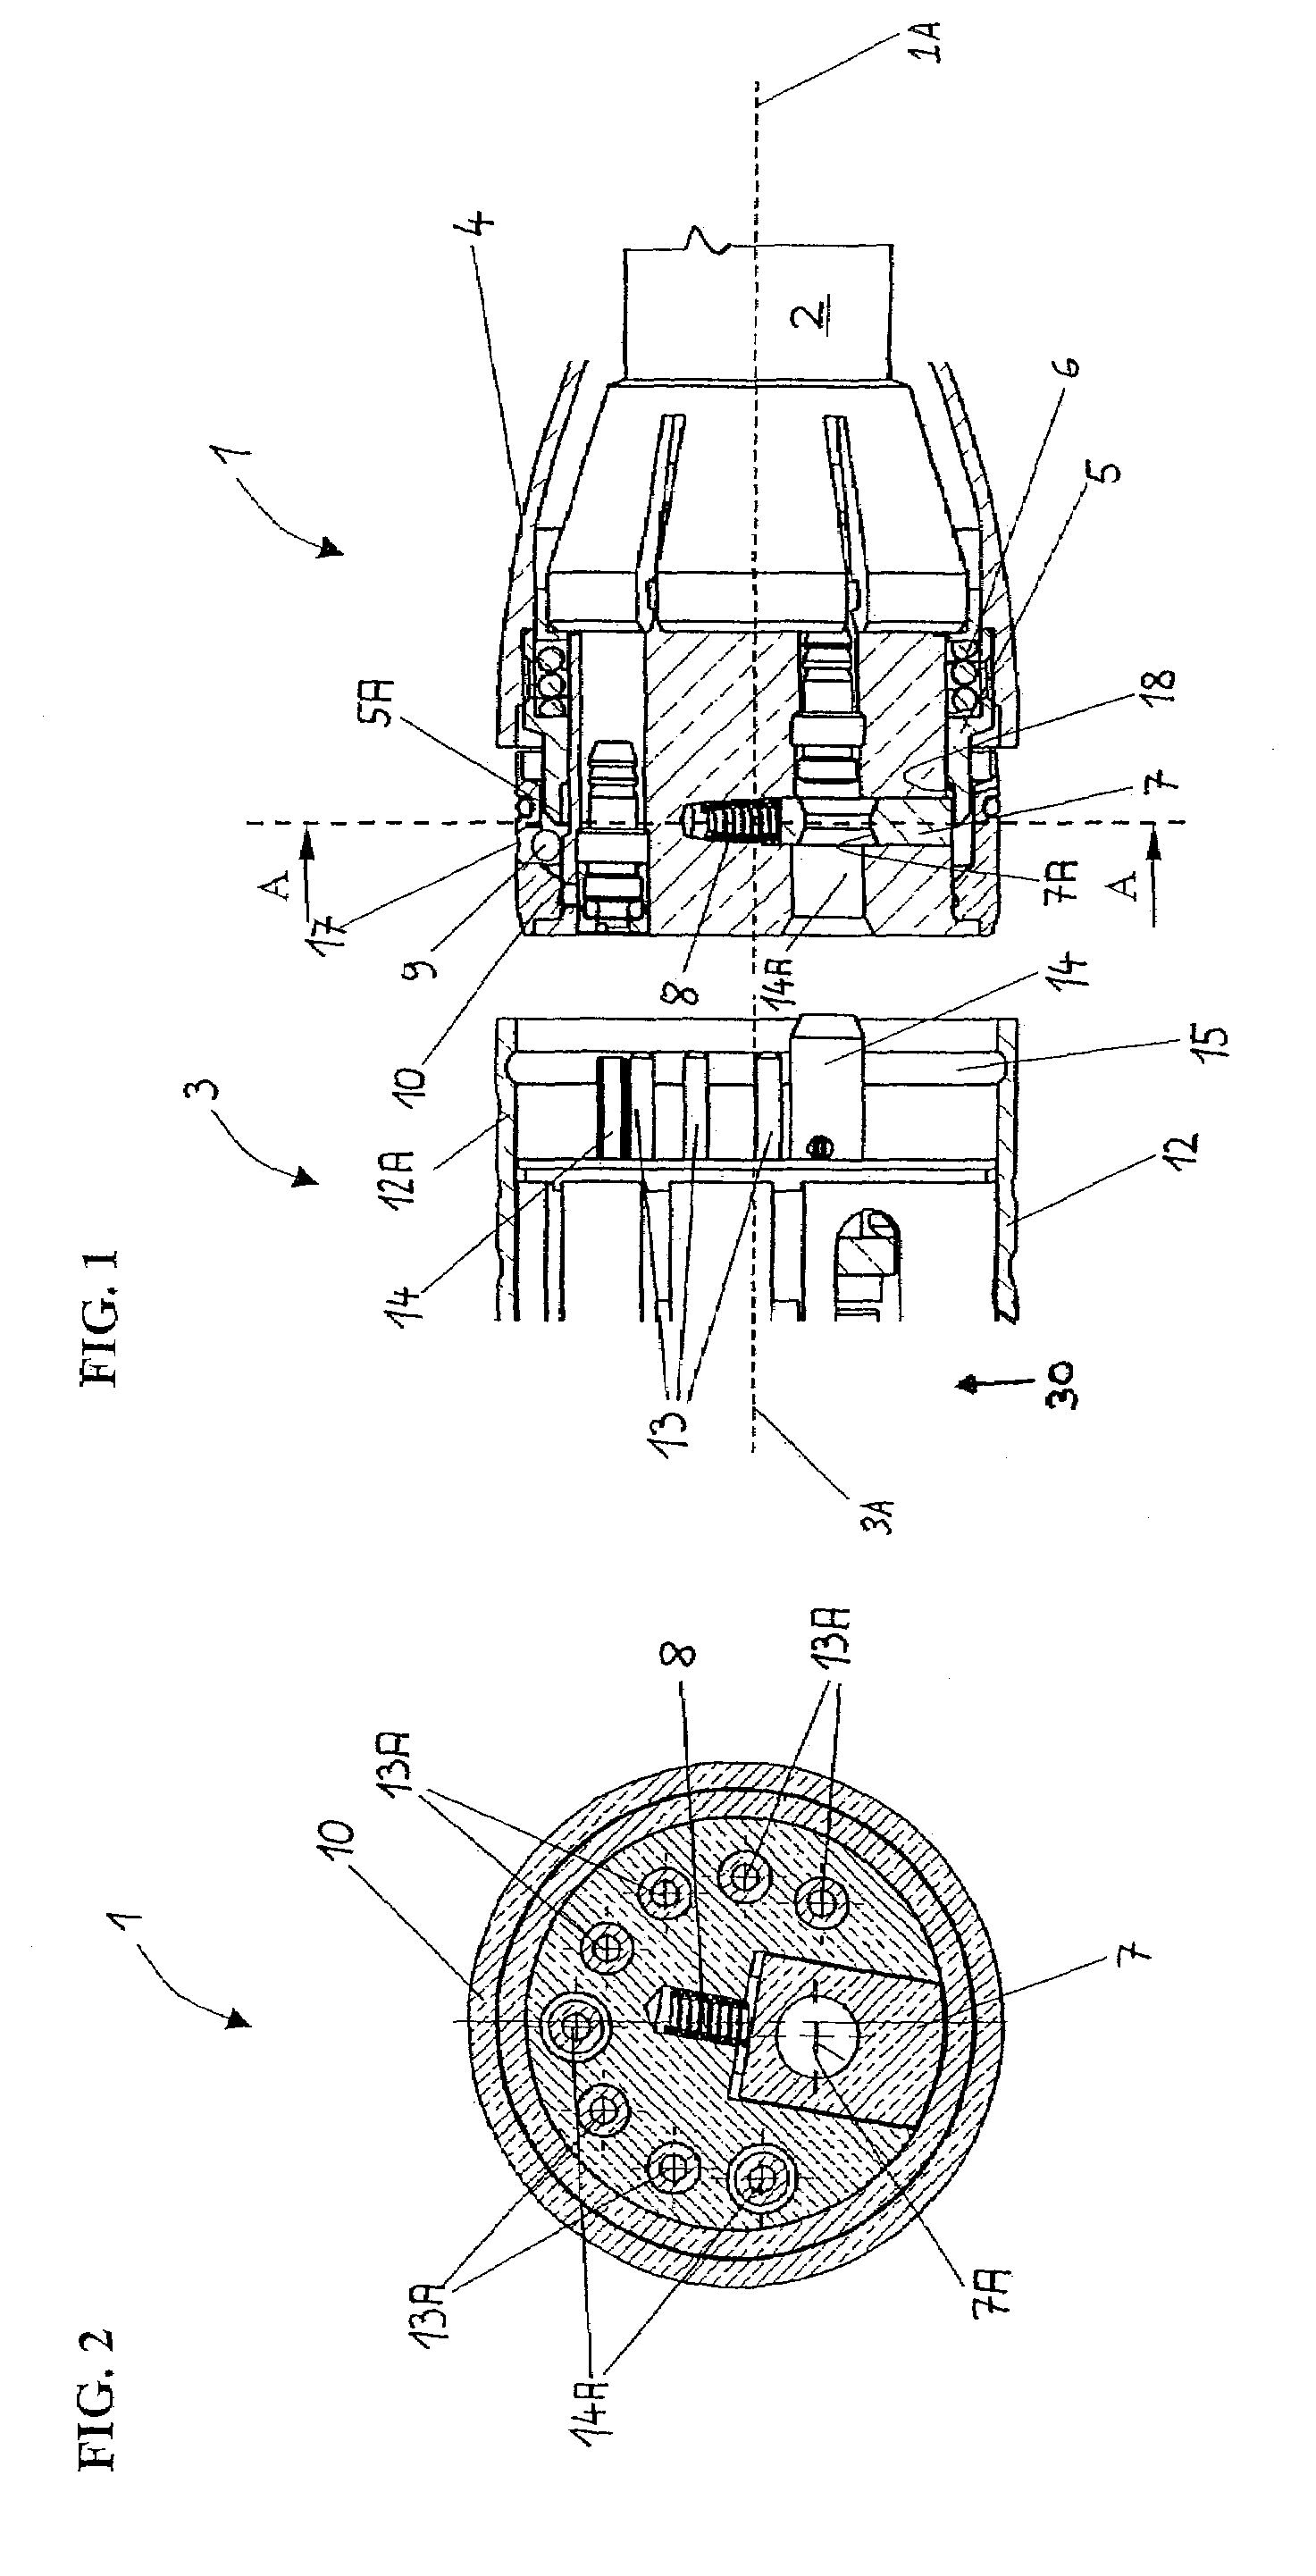 Fast-fit coupling for connecting appliances forming part of a medical or surgical handpiece system to a supply hose